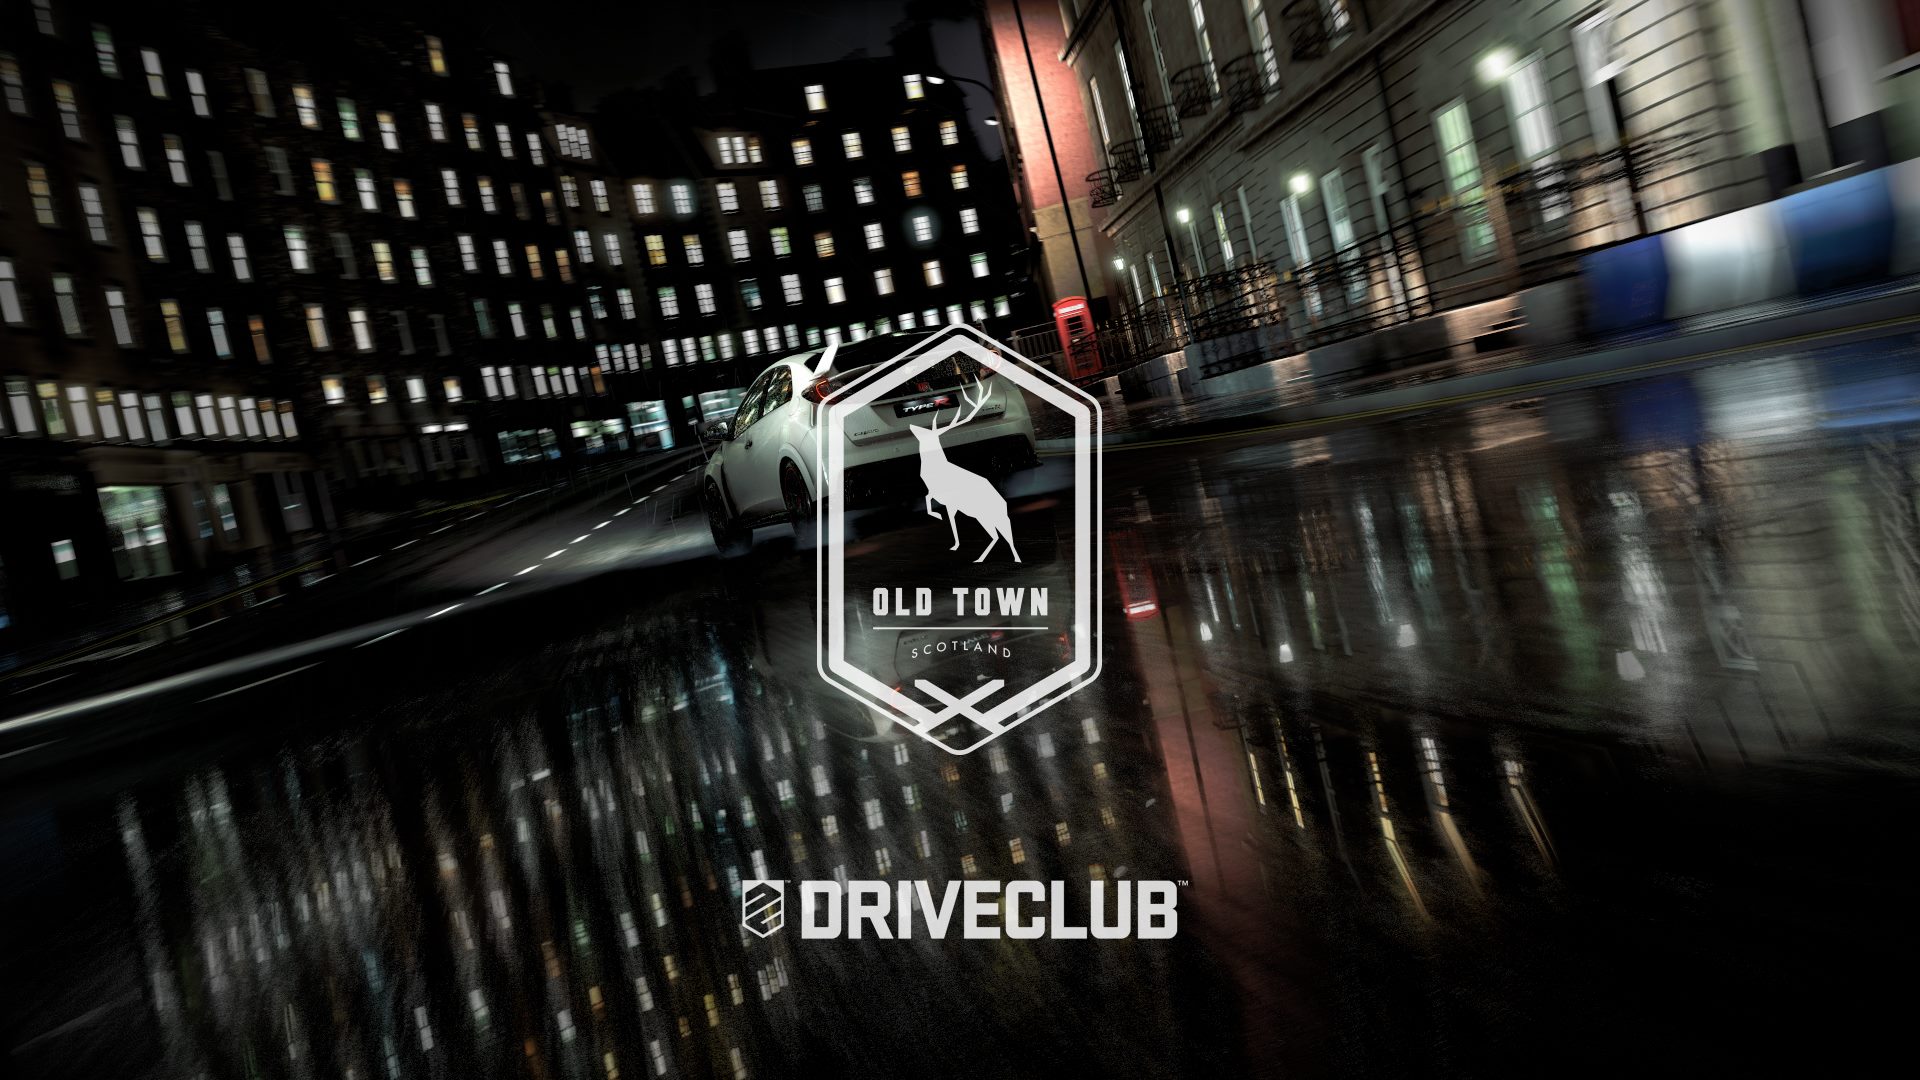 Driveclub Scottland Old Town